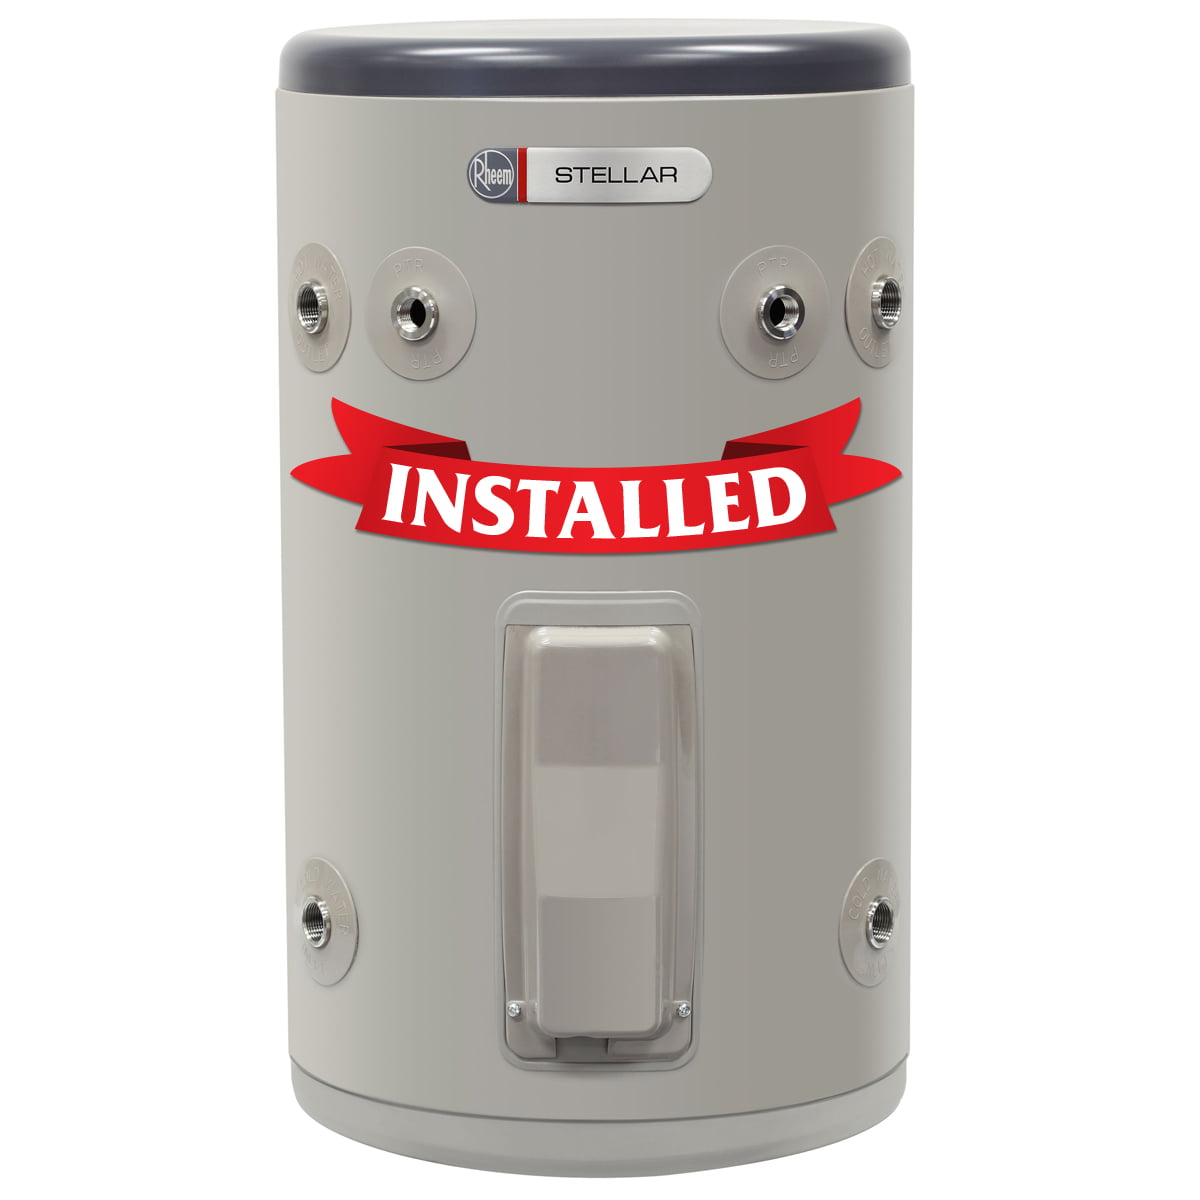 Rheem Stellar 50 Litre Electric Stainless Steel Hot Water System Price